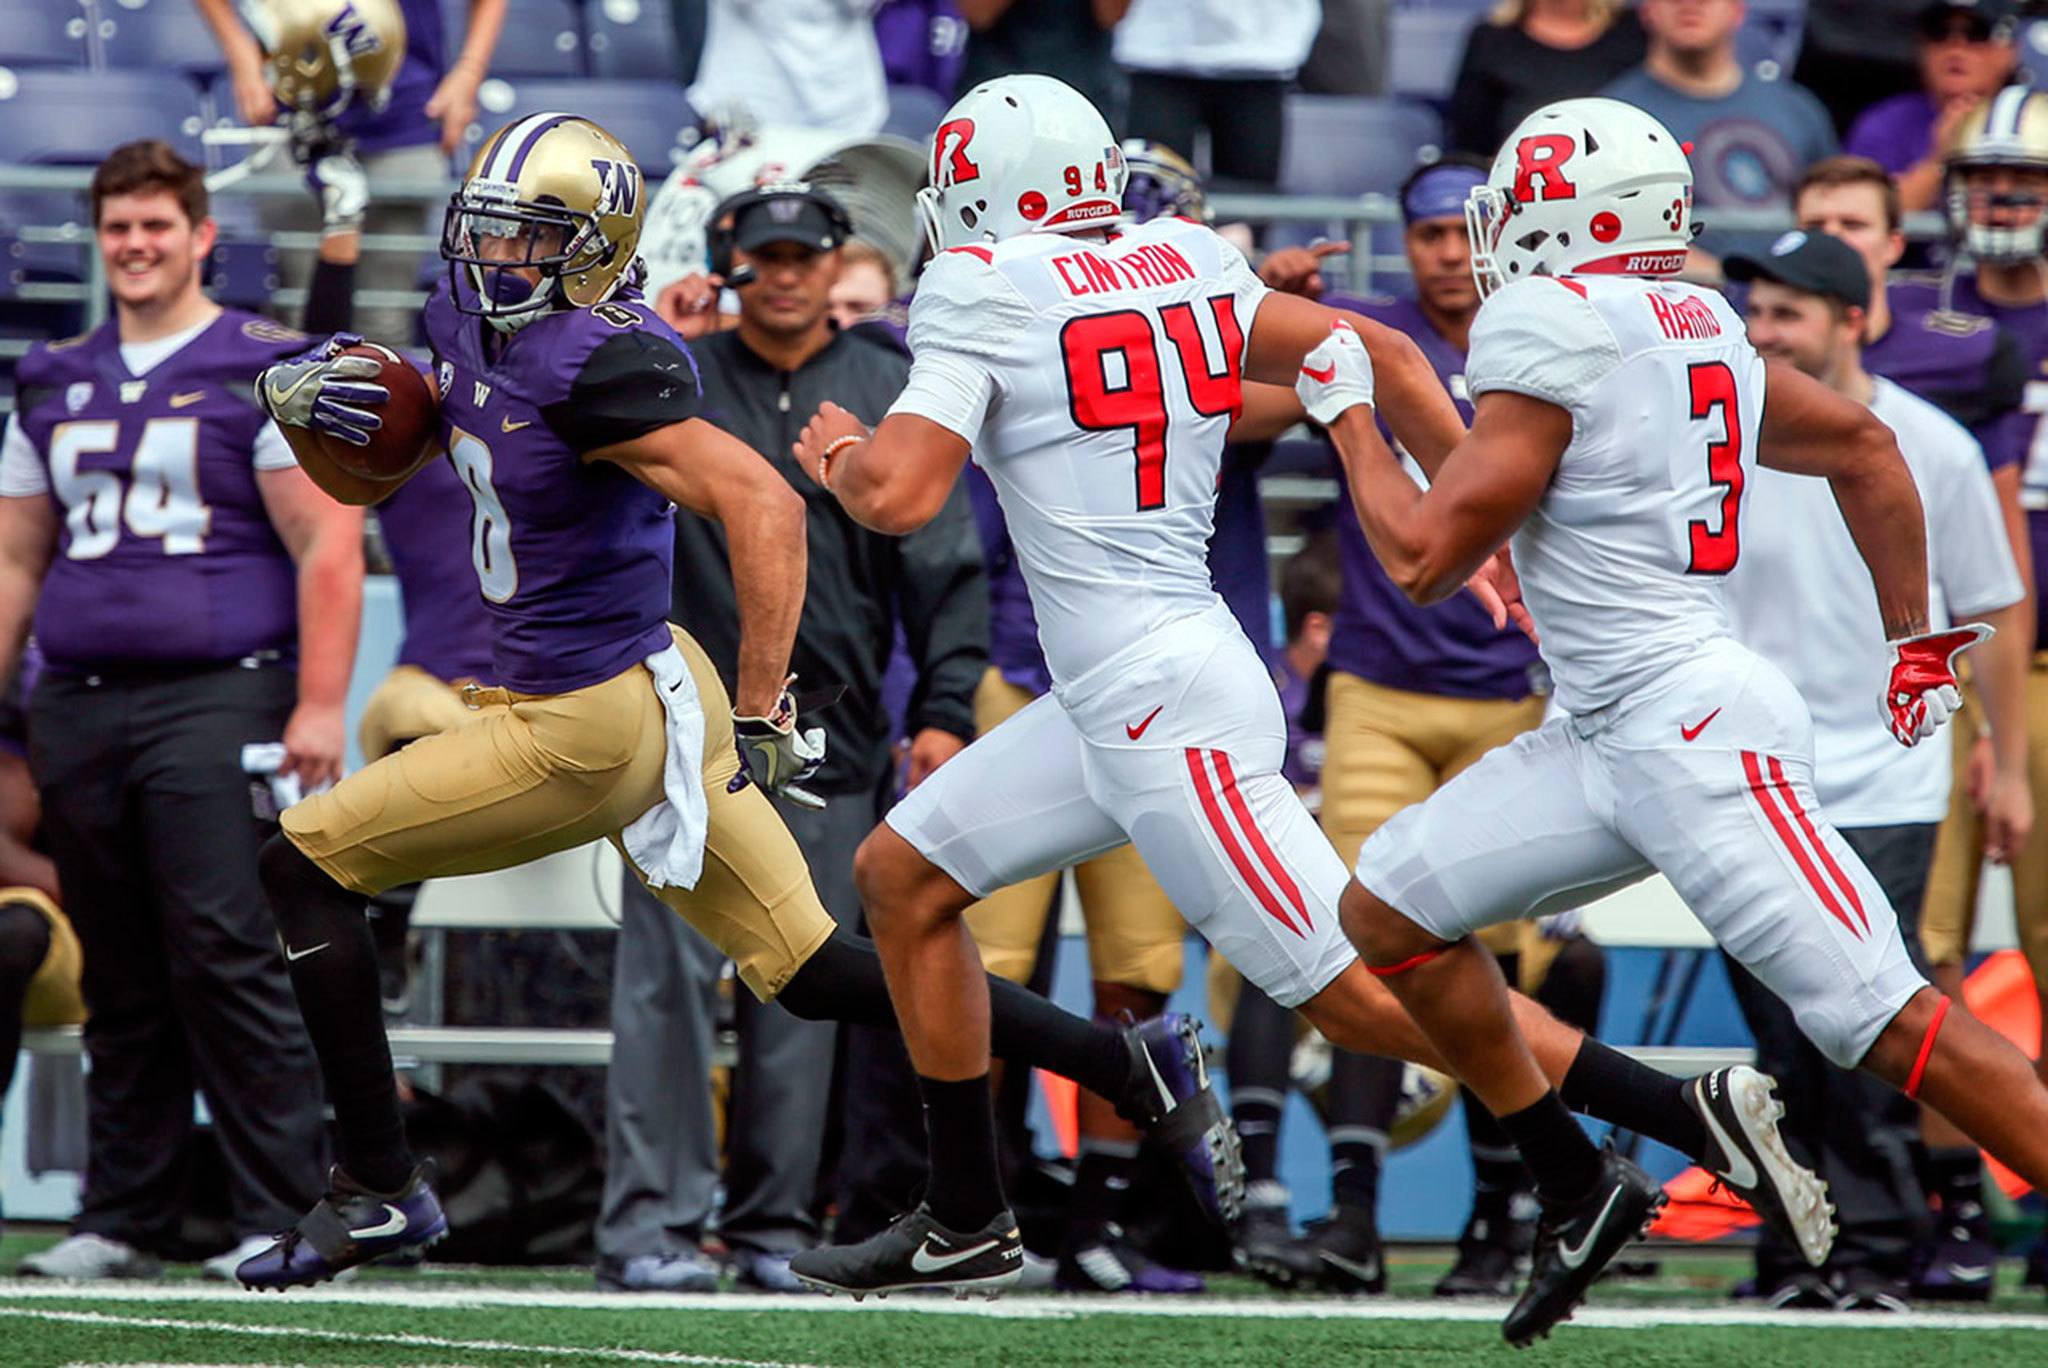 Washington’s Dante Pettis scores on a 68-yard punt return with Rutgers’ Michael Cintron (94) and Jawuan Harris (3) trailing during a game Sept. 3 at Husky Stadium. (Kevin Clark / The Herald)